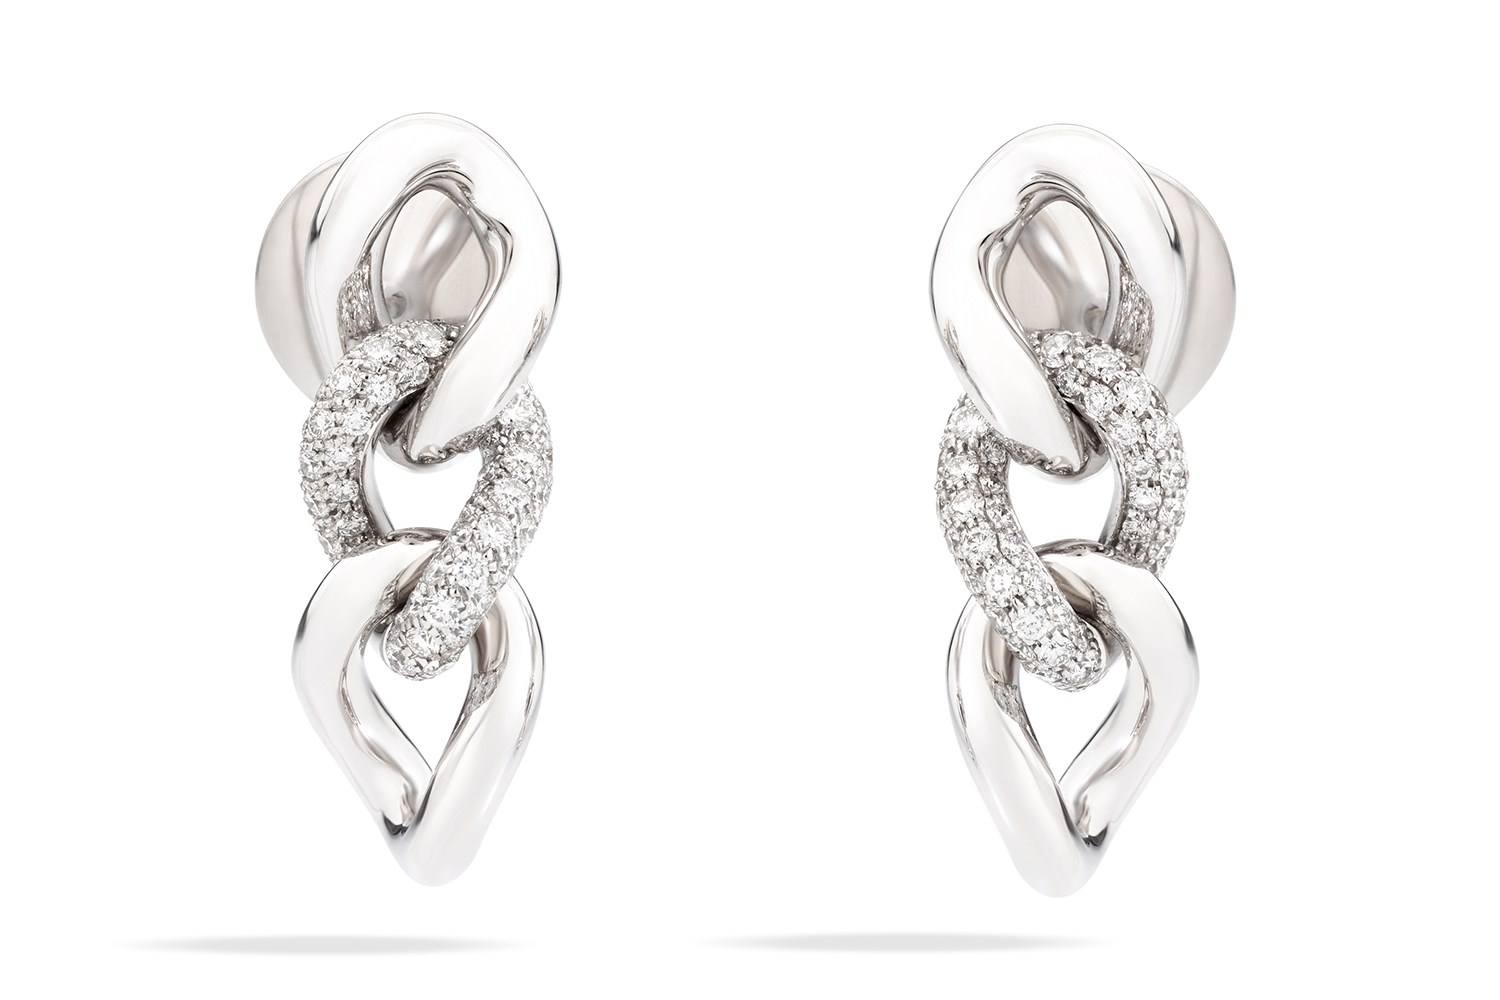 CATENE-earrings-in-white-gold-with-white-diamonds-by-Pomellato